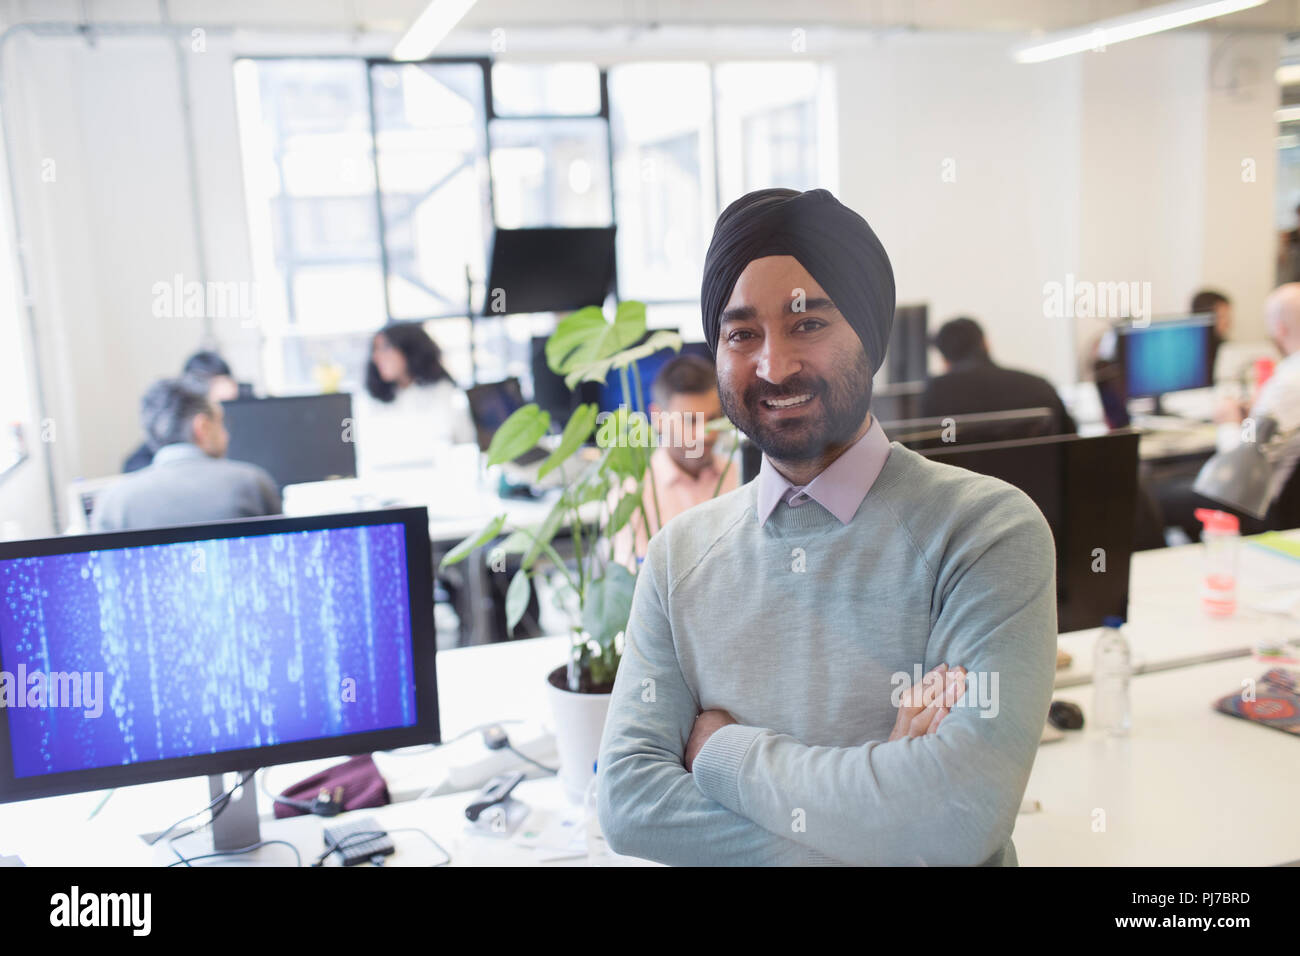 Portrait smiling, confident Indian computer programmer in turban in office Stock Photo